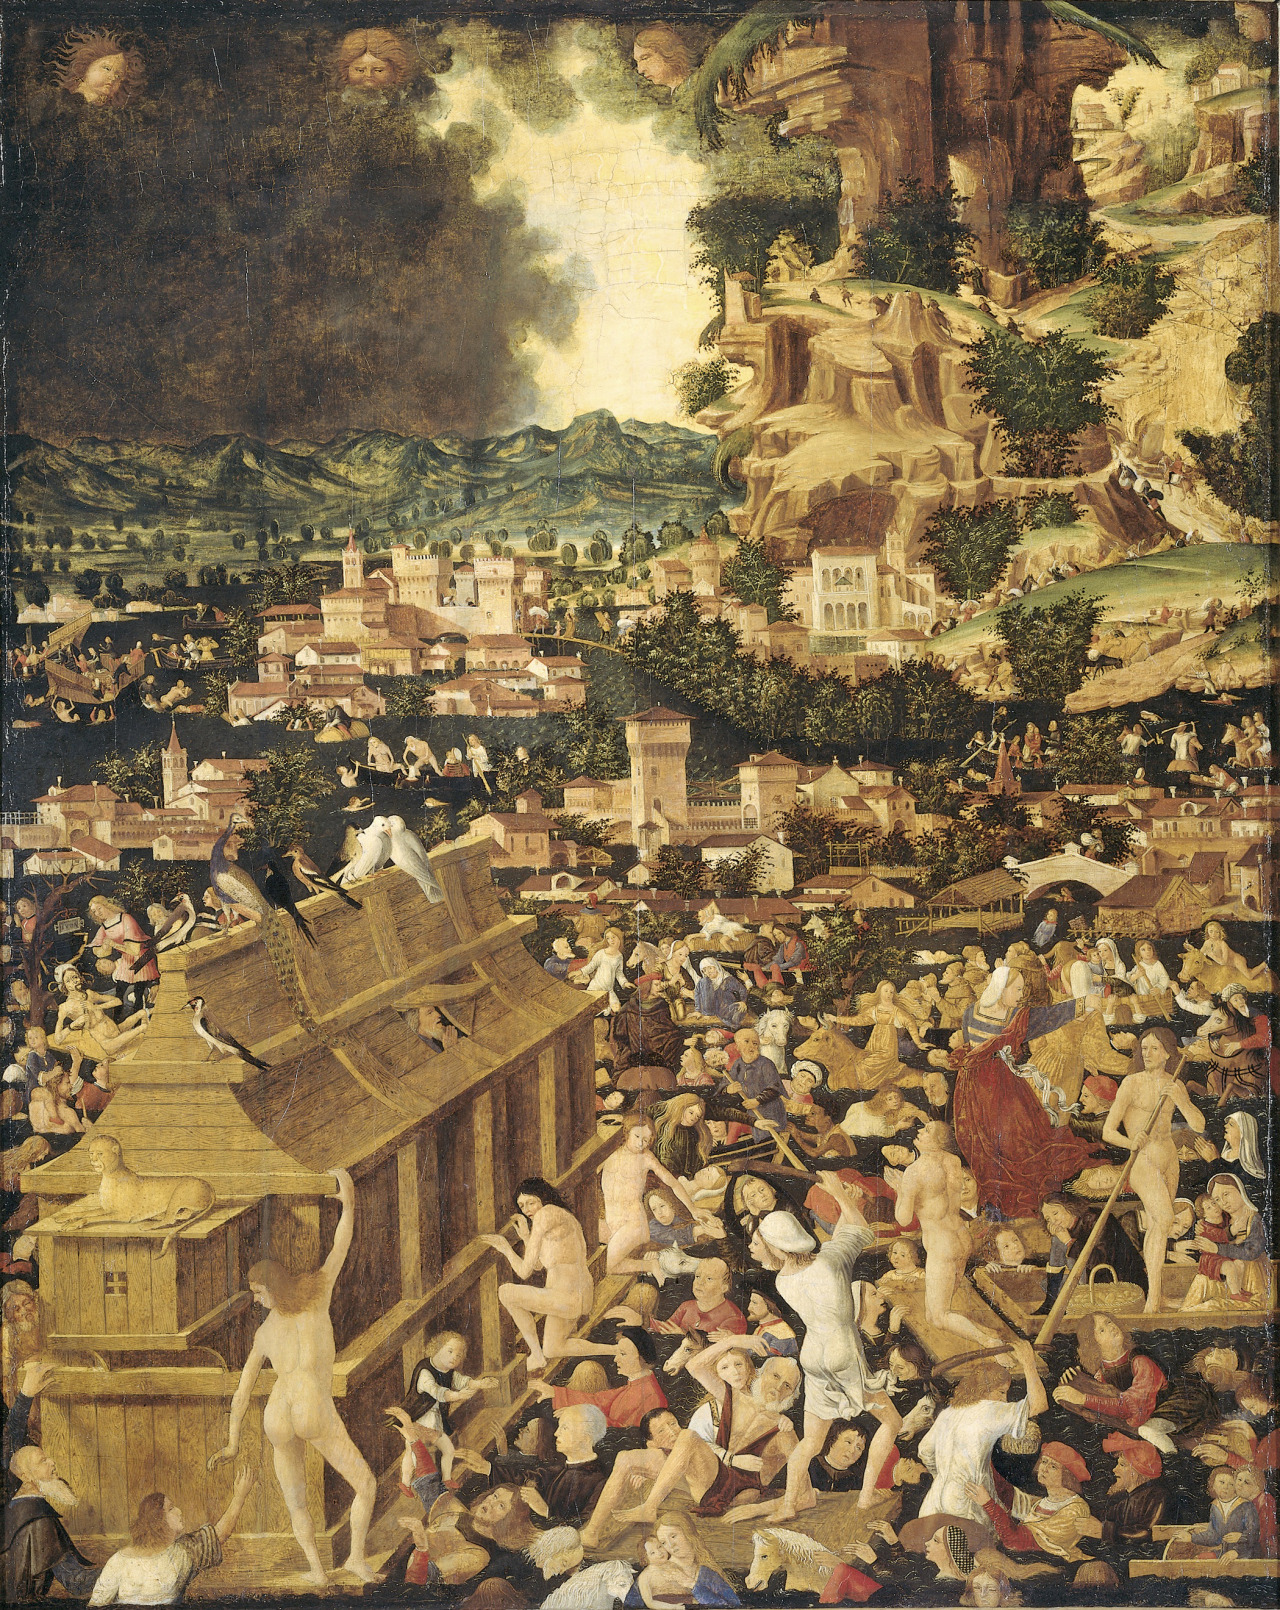 Anonymous, The Great Flood, approximately 1450 - 1499, oil on panel, 122 cm x 98